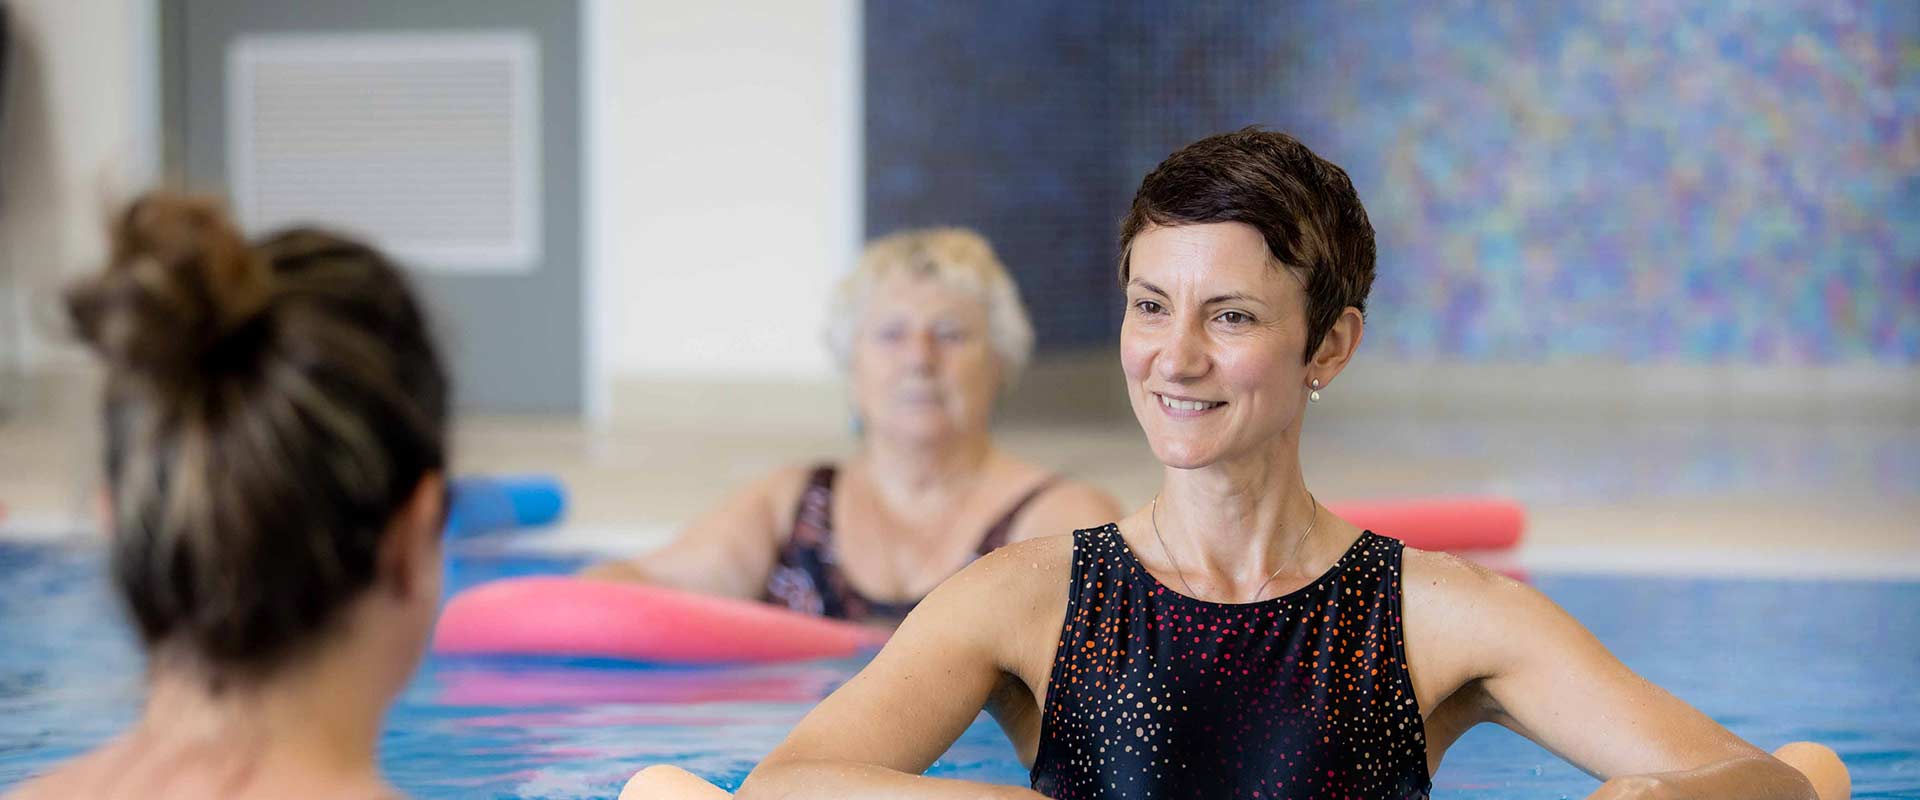 Lake Cathie Physiotherapy